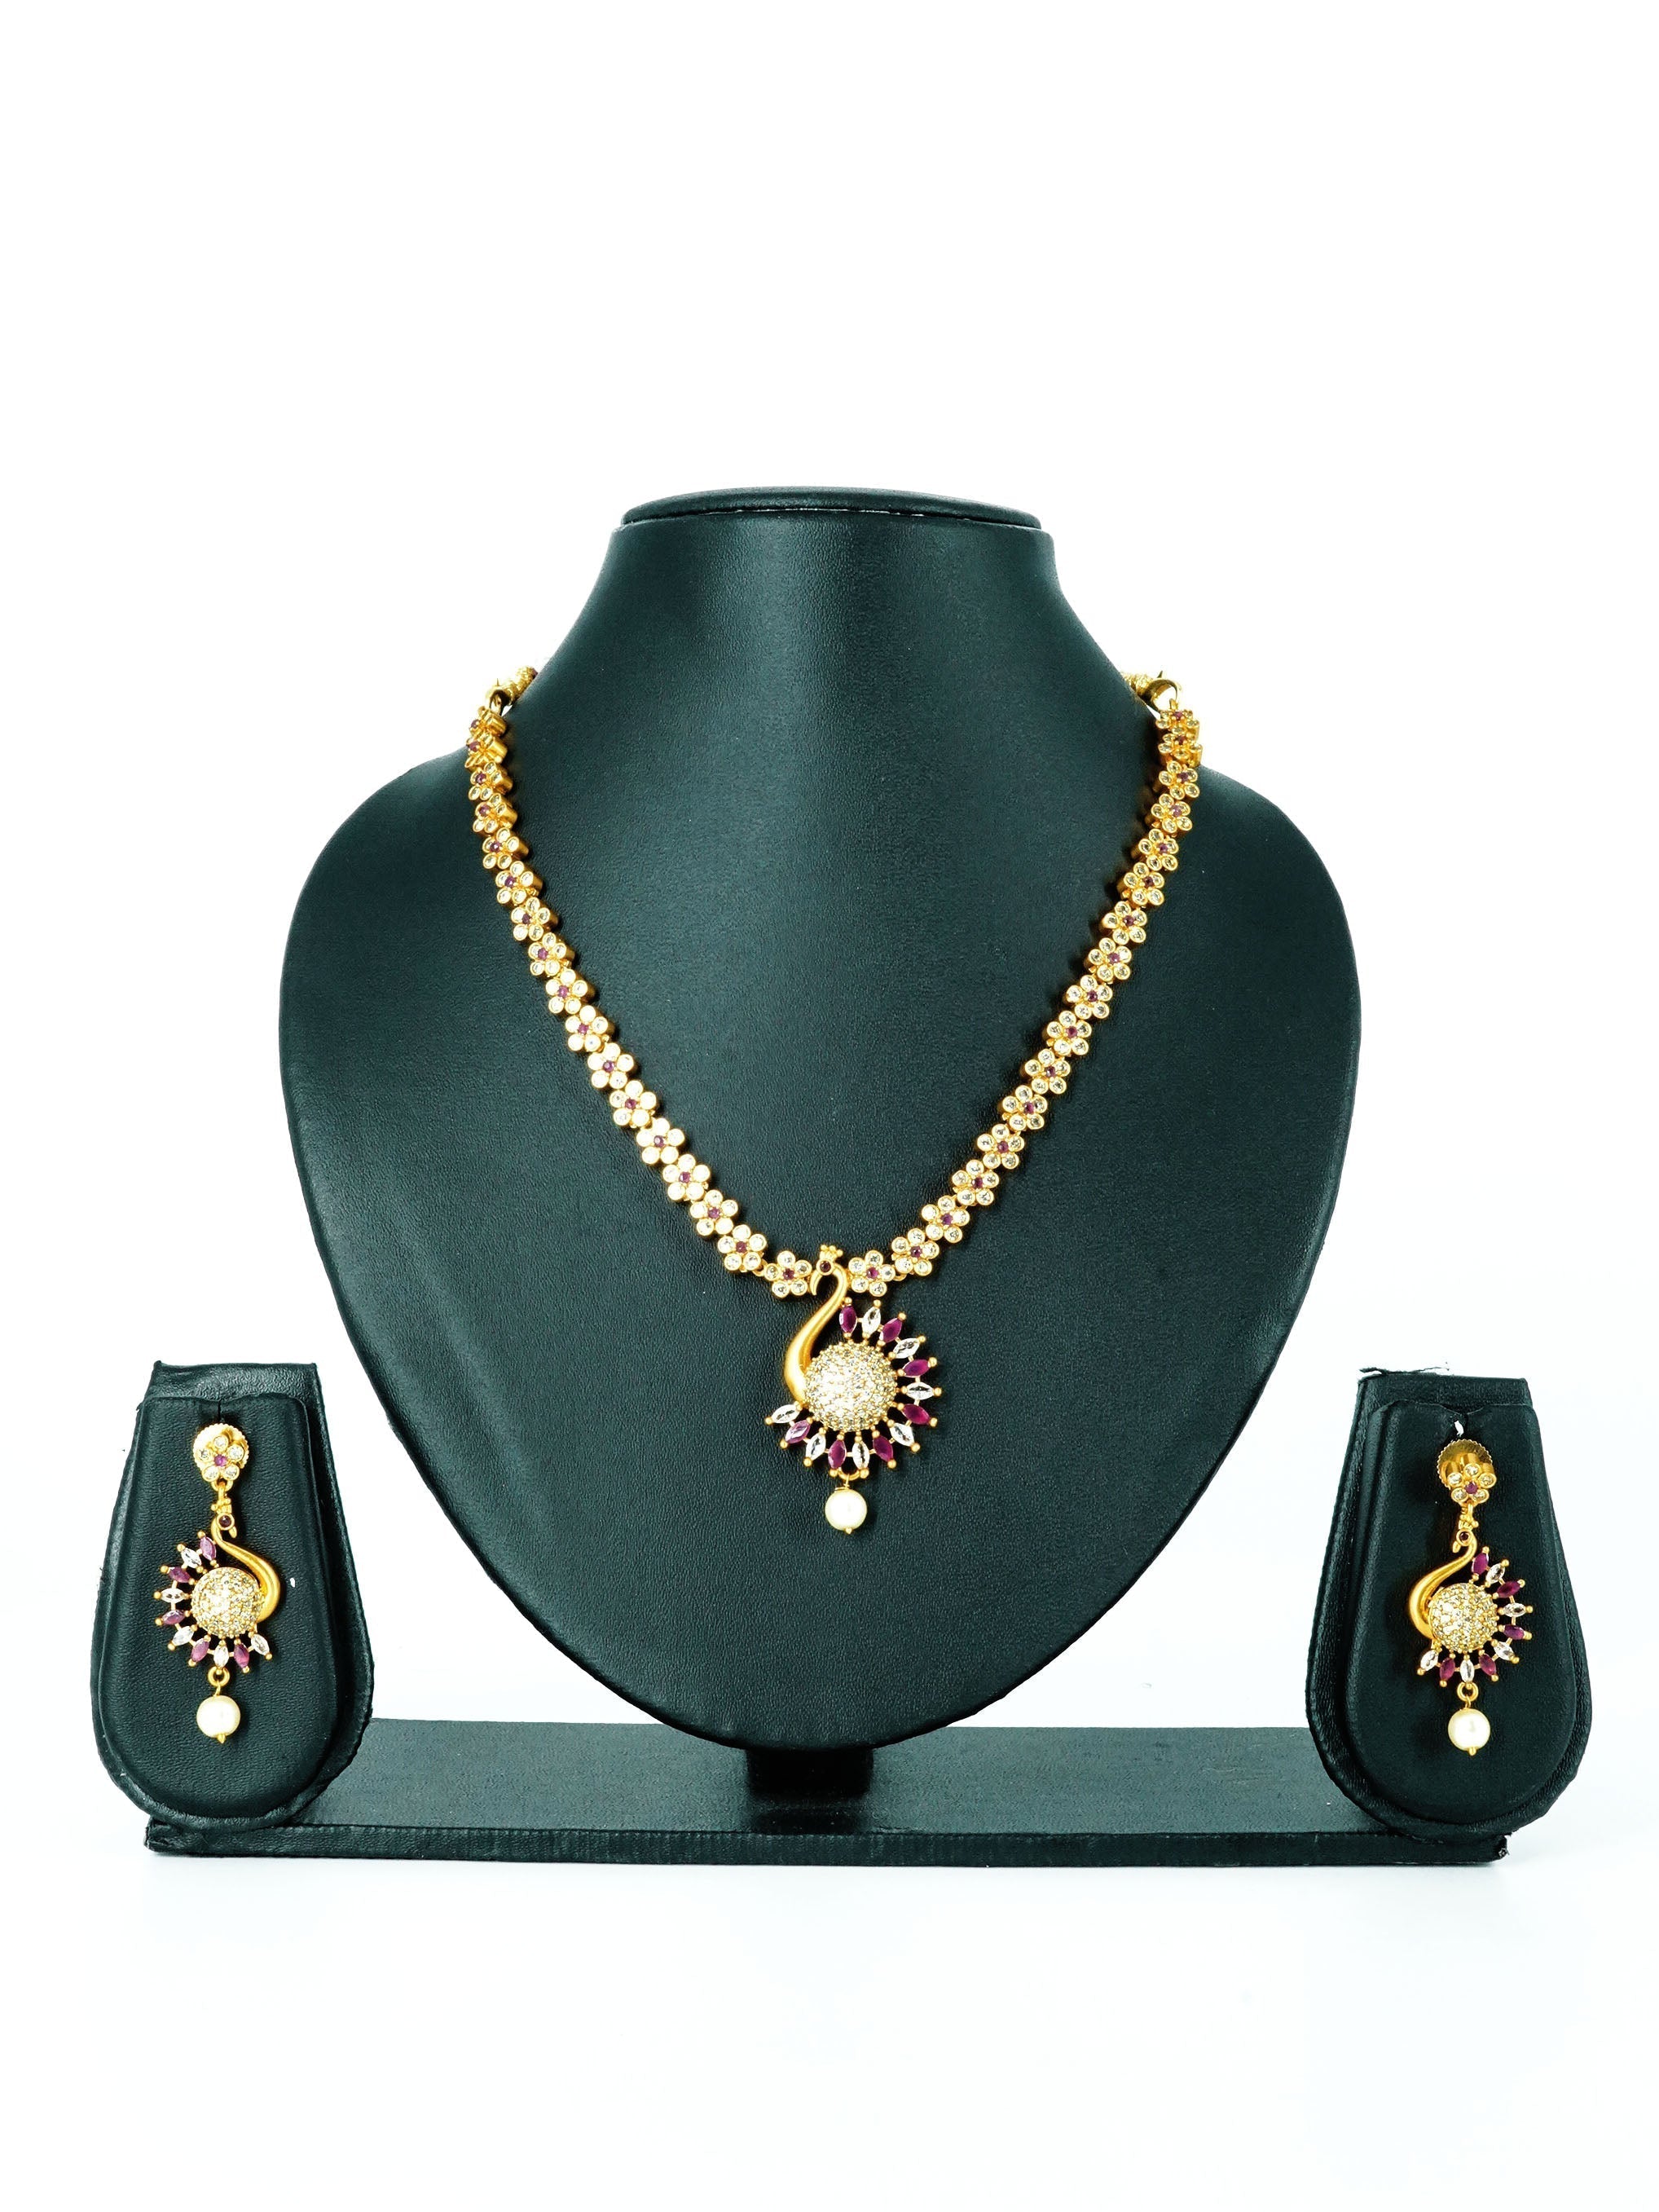 Premium Gold Finish Peacock Necklace with CZ Stones in diff colours 12889N-1